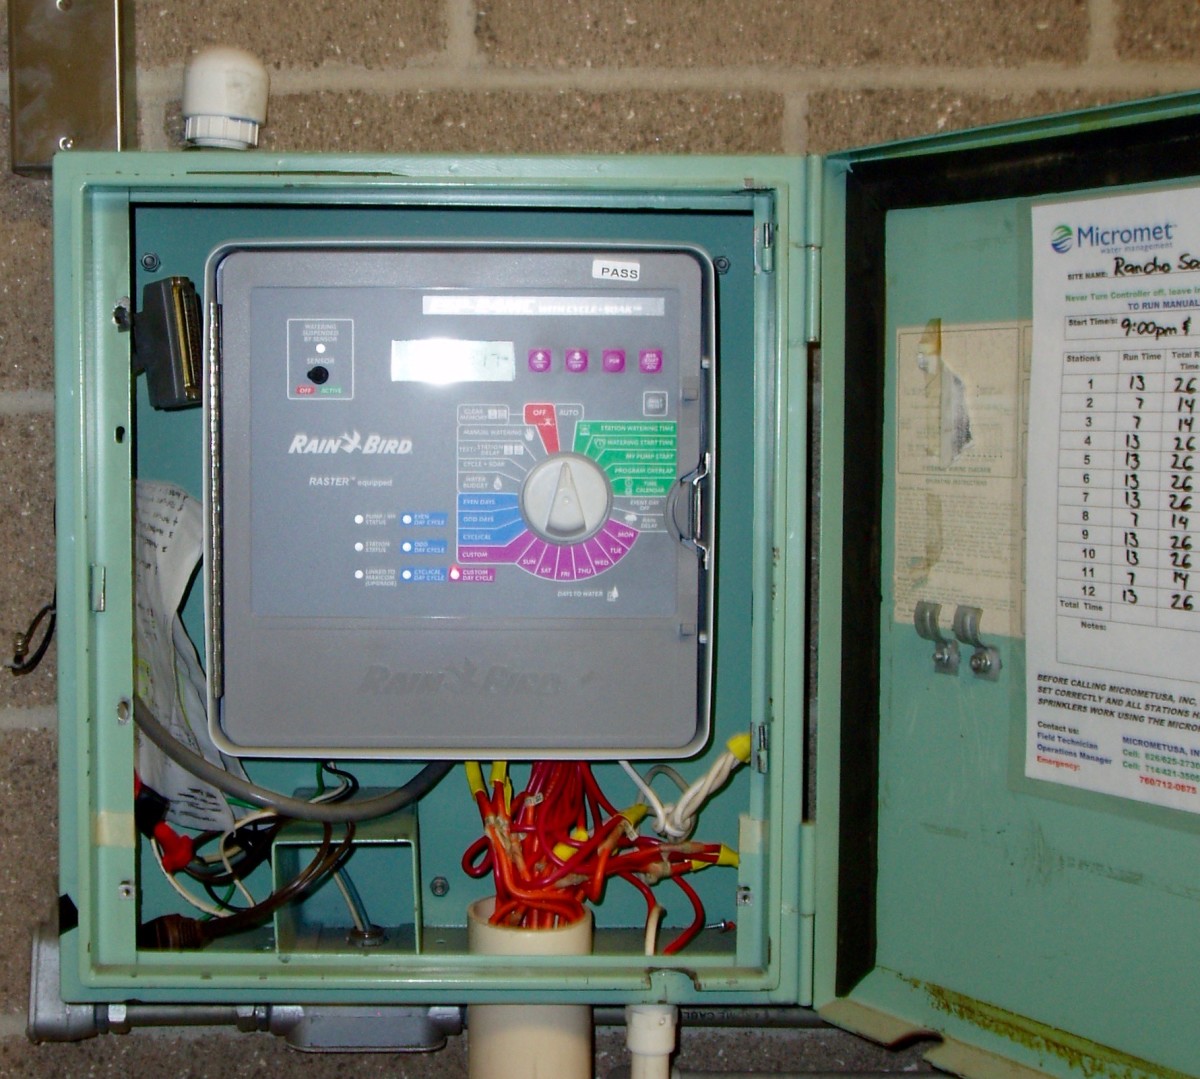 This controller times the irrigation for a school landscape. It can accommodate a number of stations and their schedules.